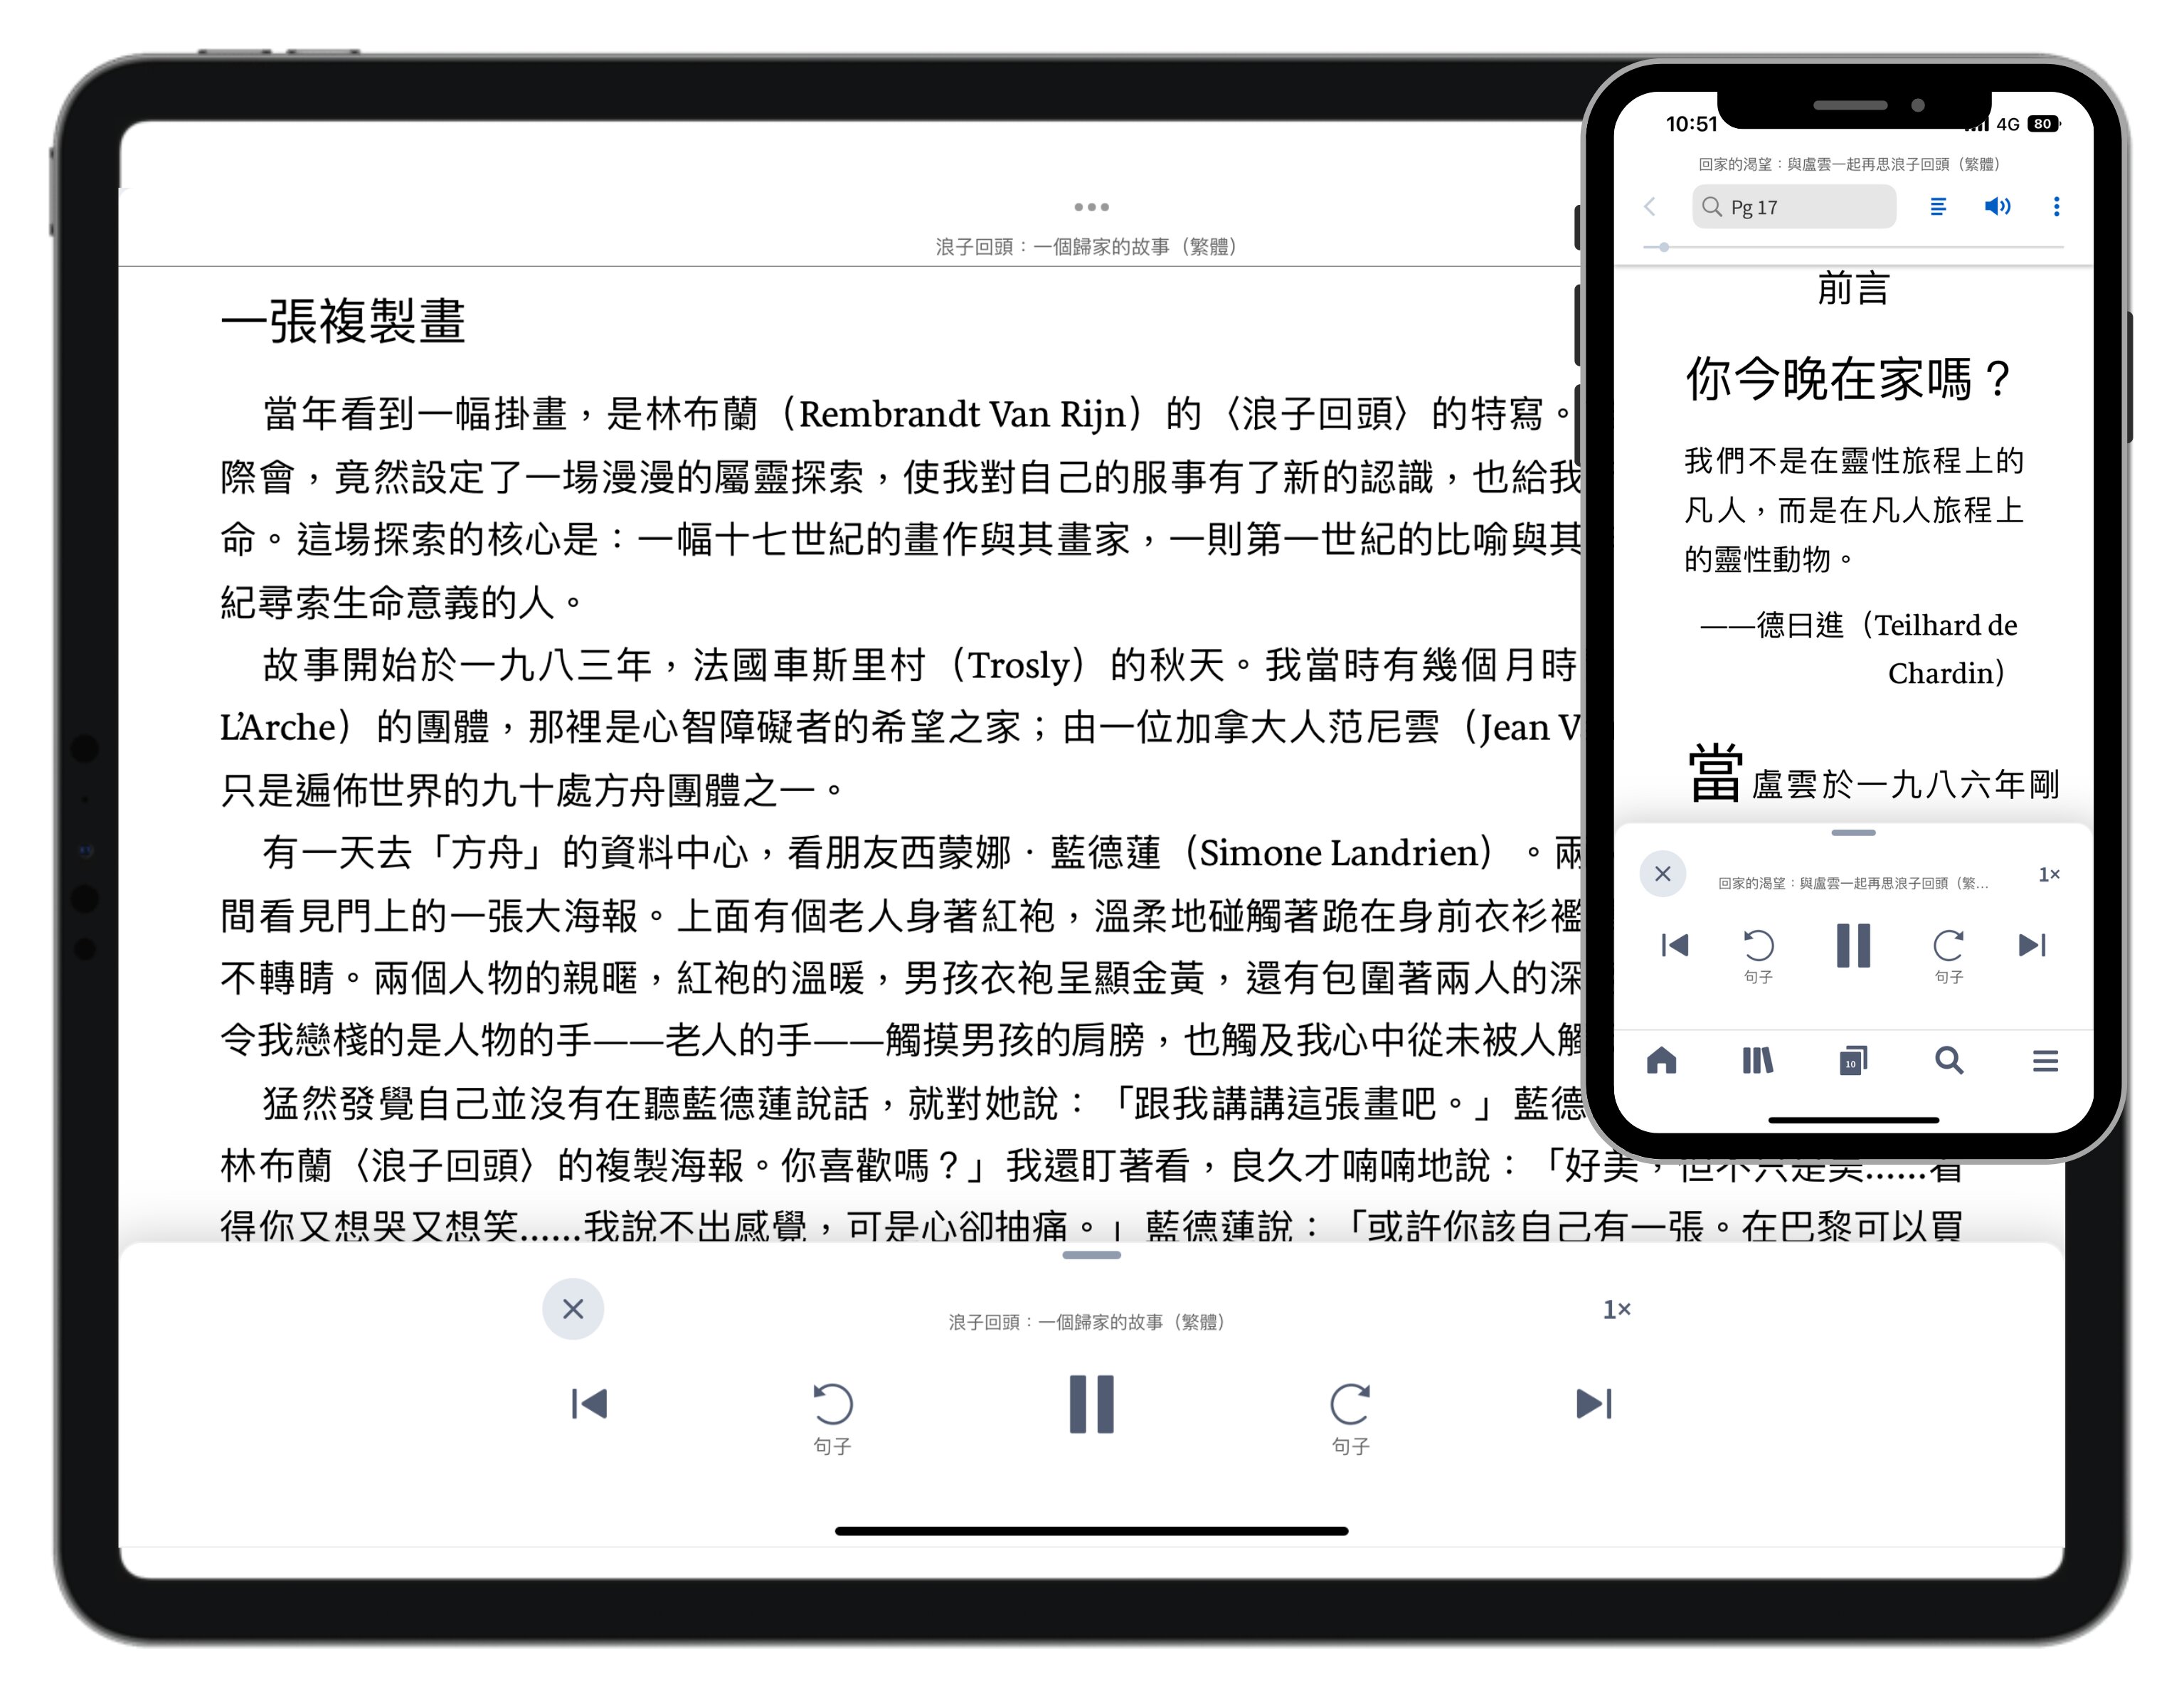 An iPad showing the simple, clean interface for the Read Aloud feature. You can adjust the speed, skip forward or backward a verse, and more.